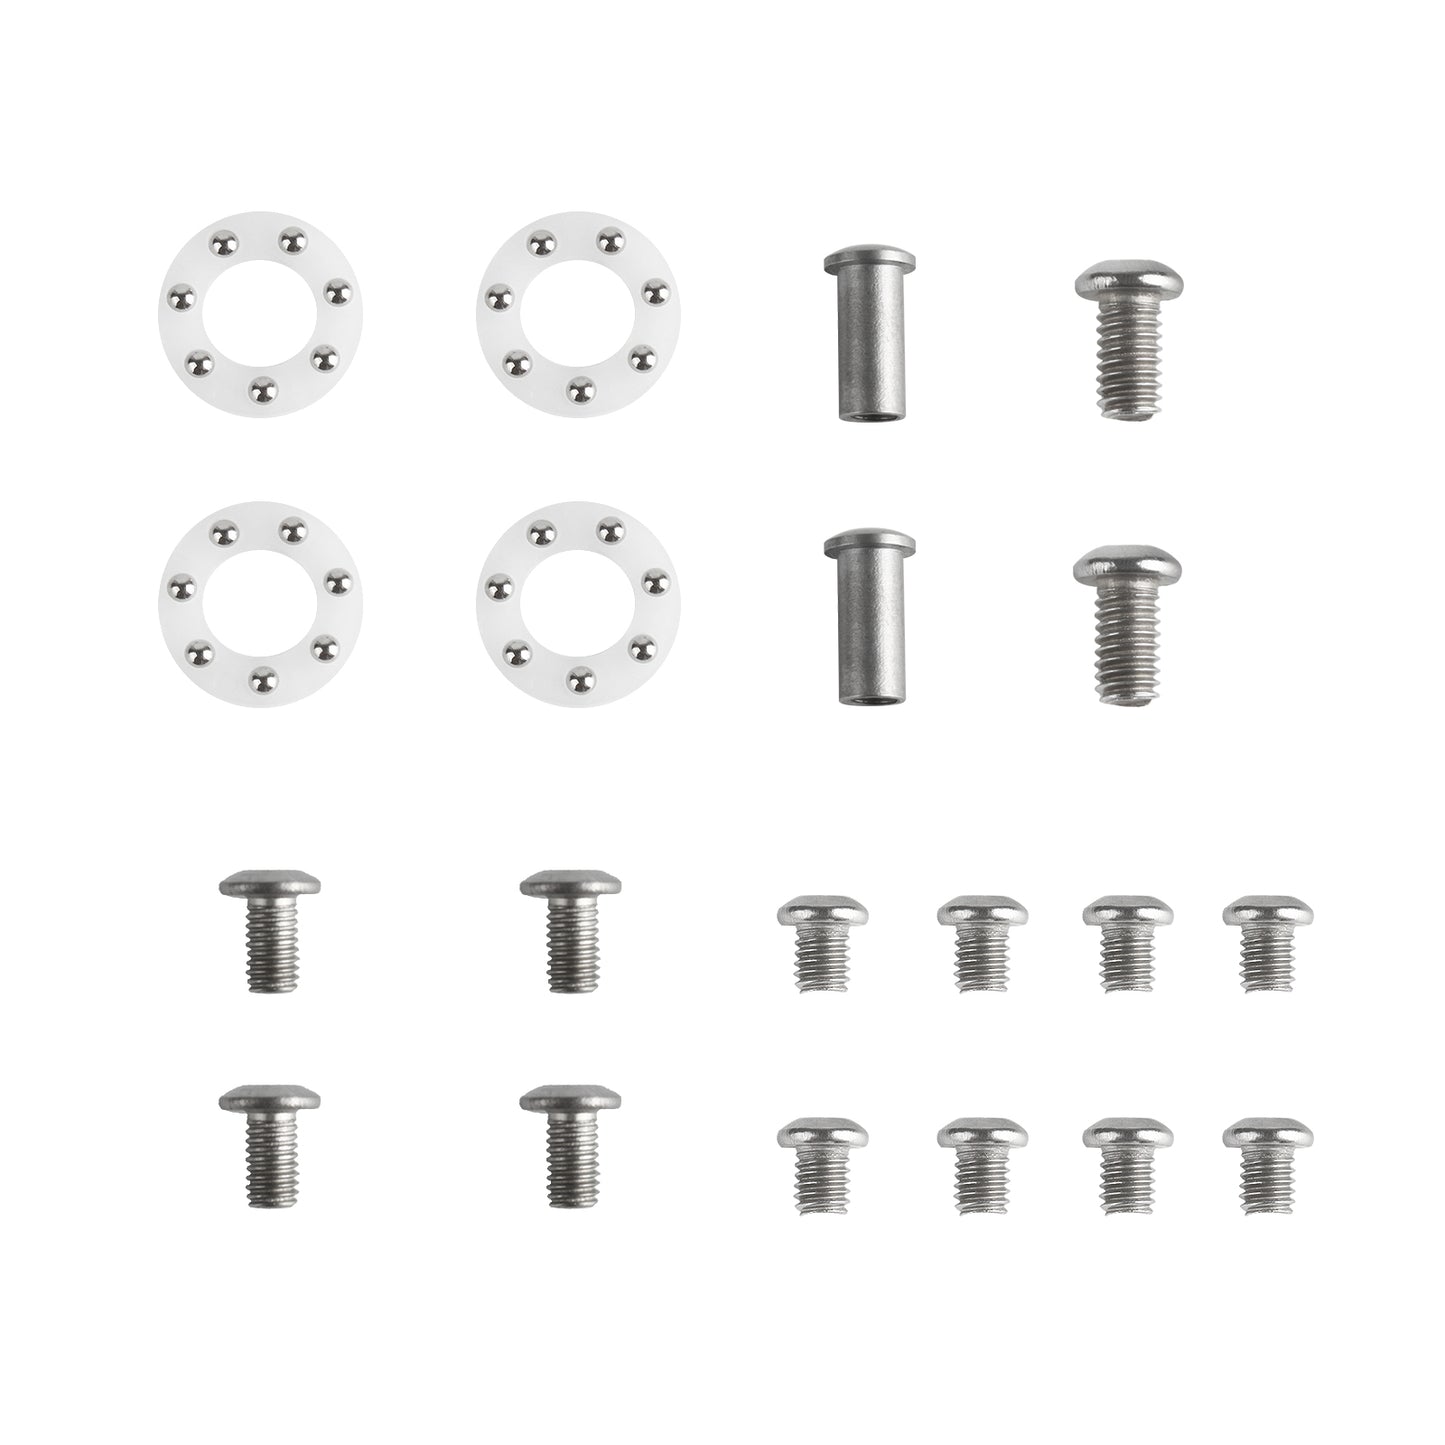 Andux Balisong Accessories Set Including 4 Gasket/Bearings 2 Bolts and 14 Screws for CS/HDD45